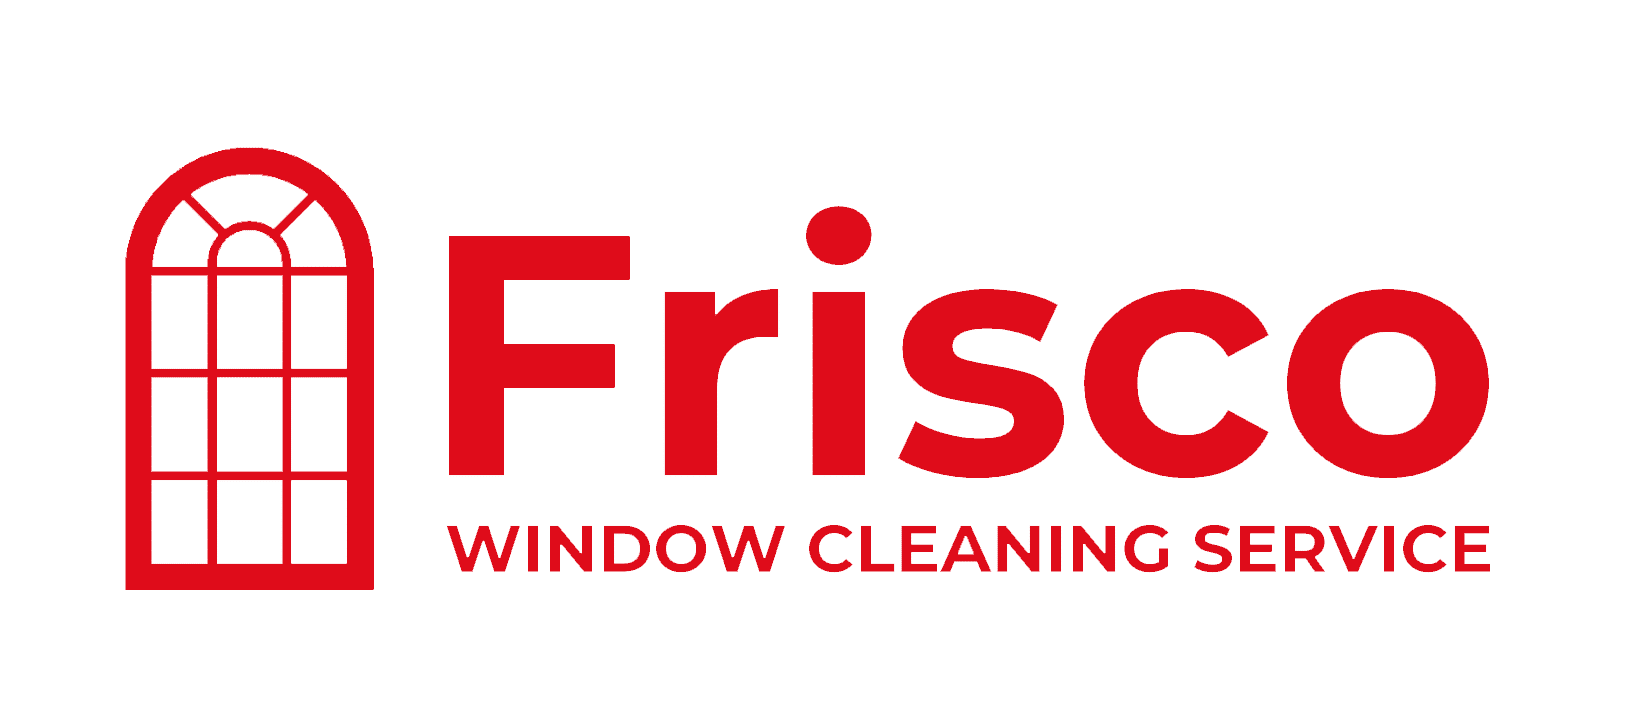 Frisco Window Cleaning Service Company in Frisco Texas